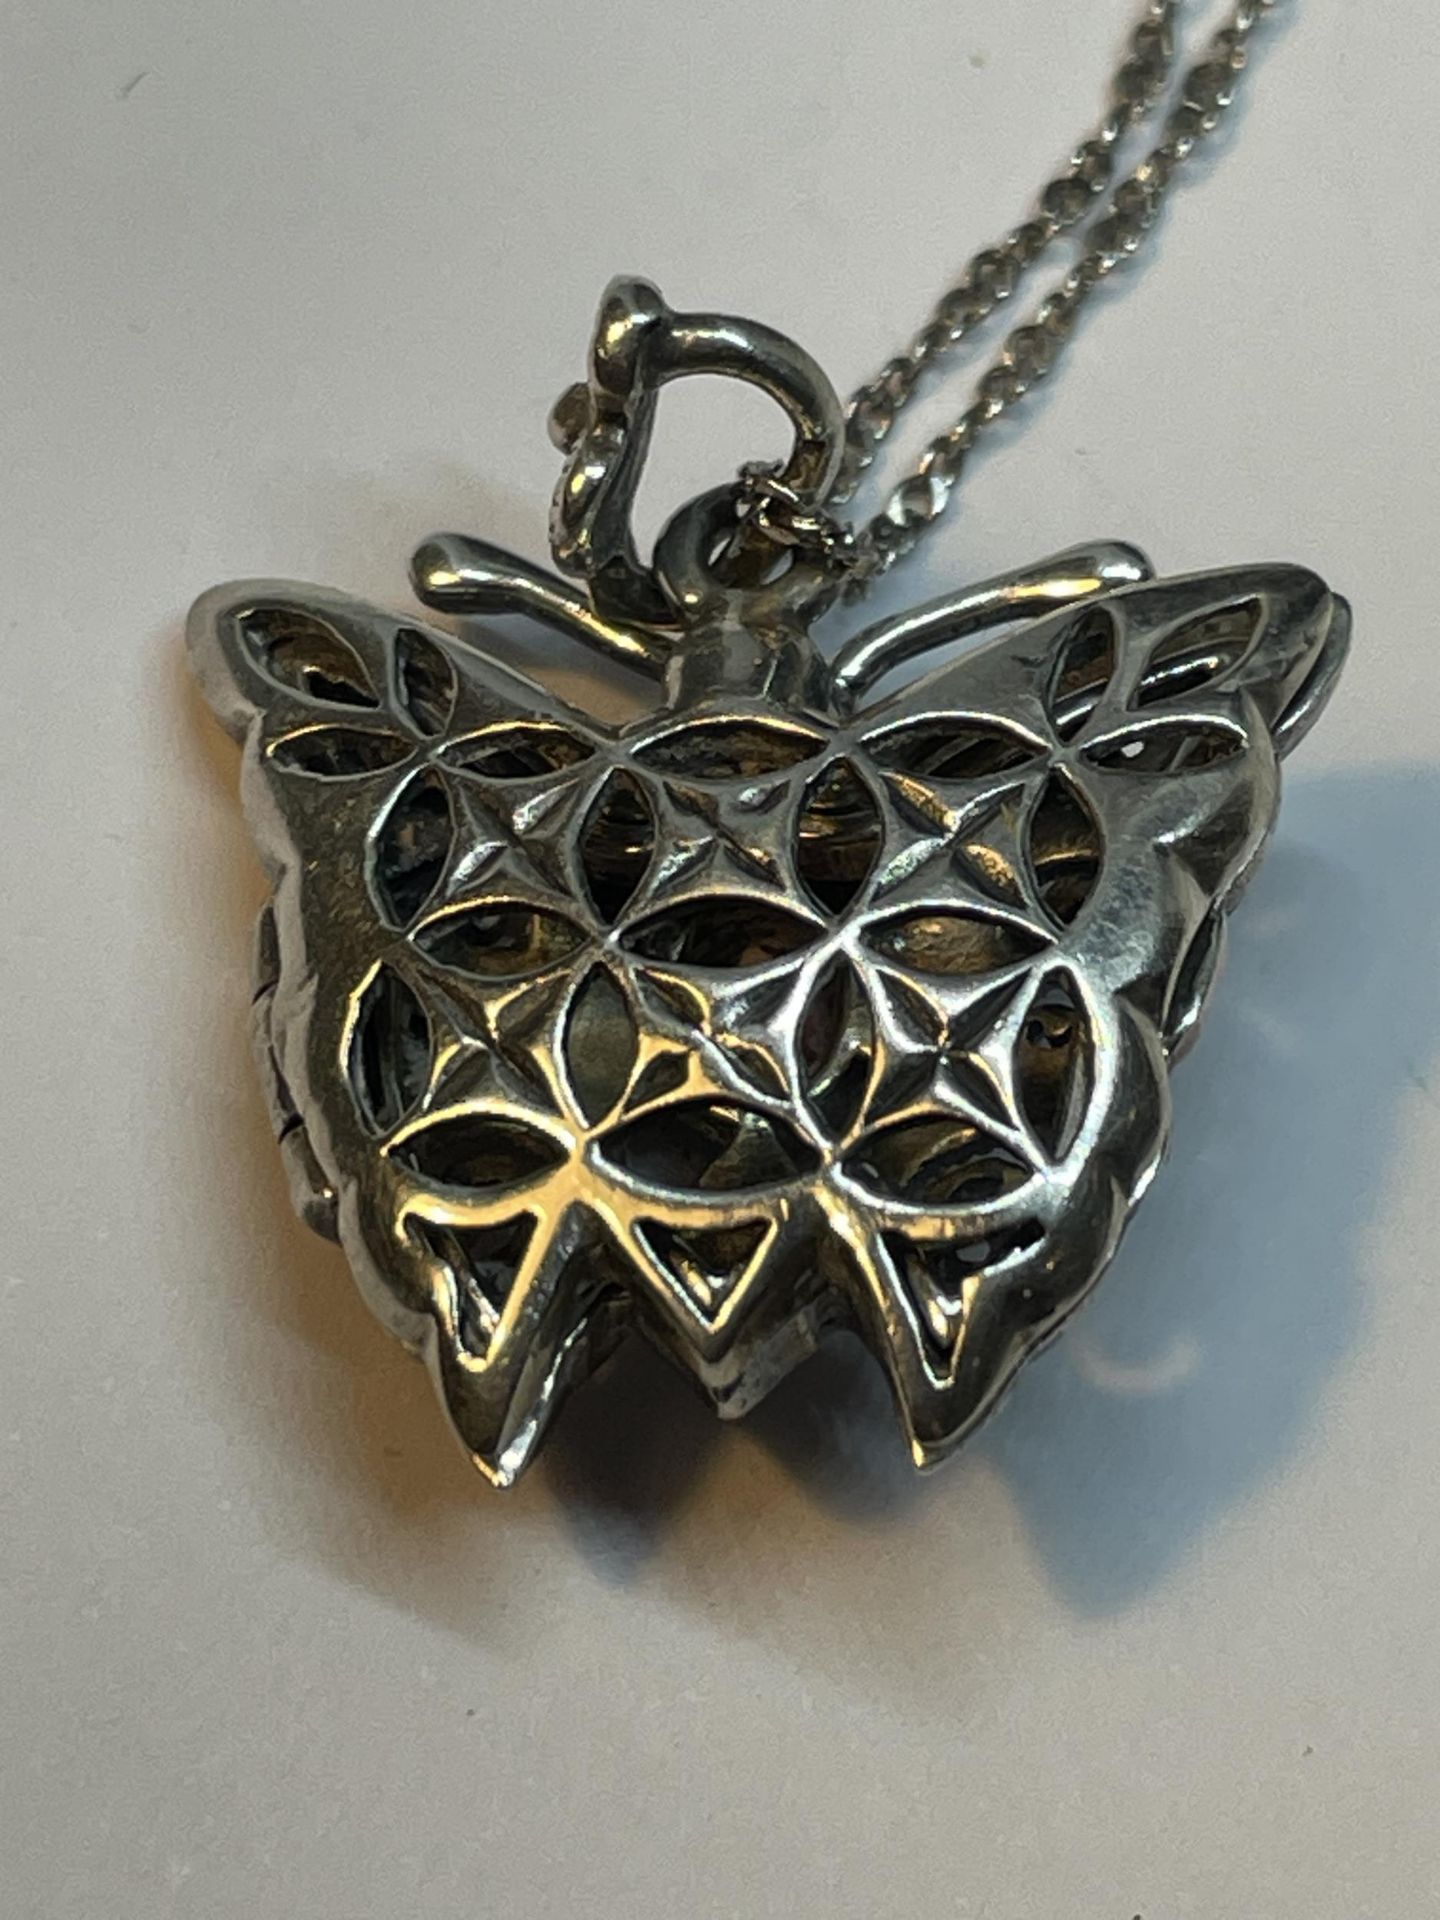 A MARKED 925 SILVER ORNATE BUTTERFLY LOCKET ON A CHAIN - Image 3 of 4